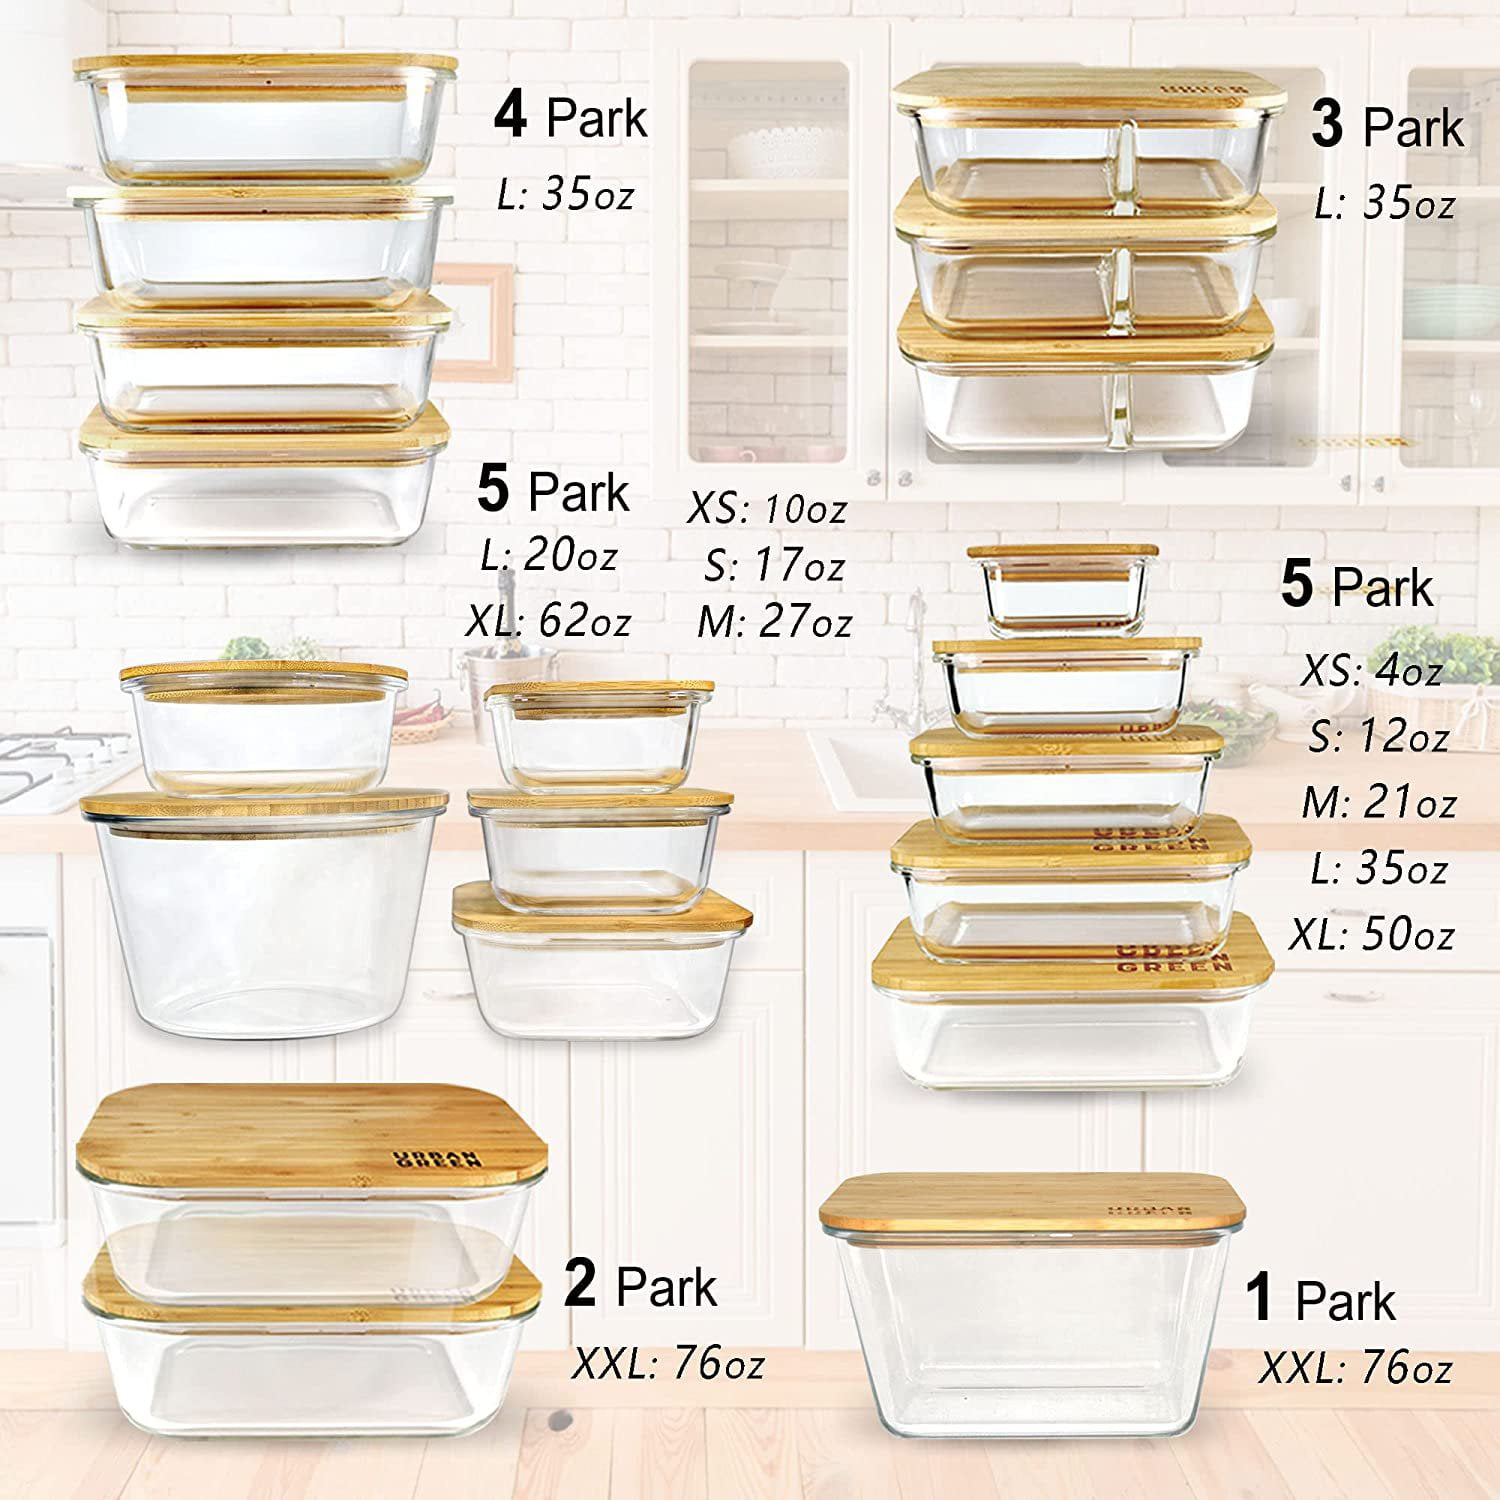 EcoPreps Glass Meal Prep Containers with Bamboo Lids【3 Pack】100% Plastic  Free, Eco-Friendly Glass Lunch Containers, Bamboo Lid Storage Containers 